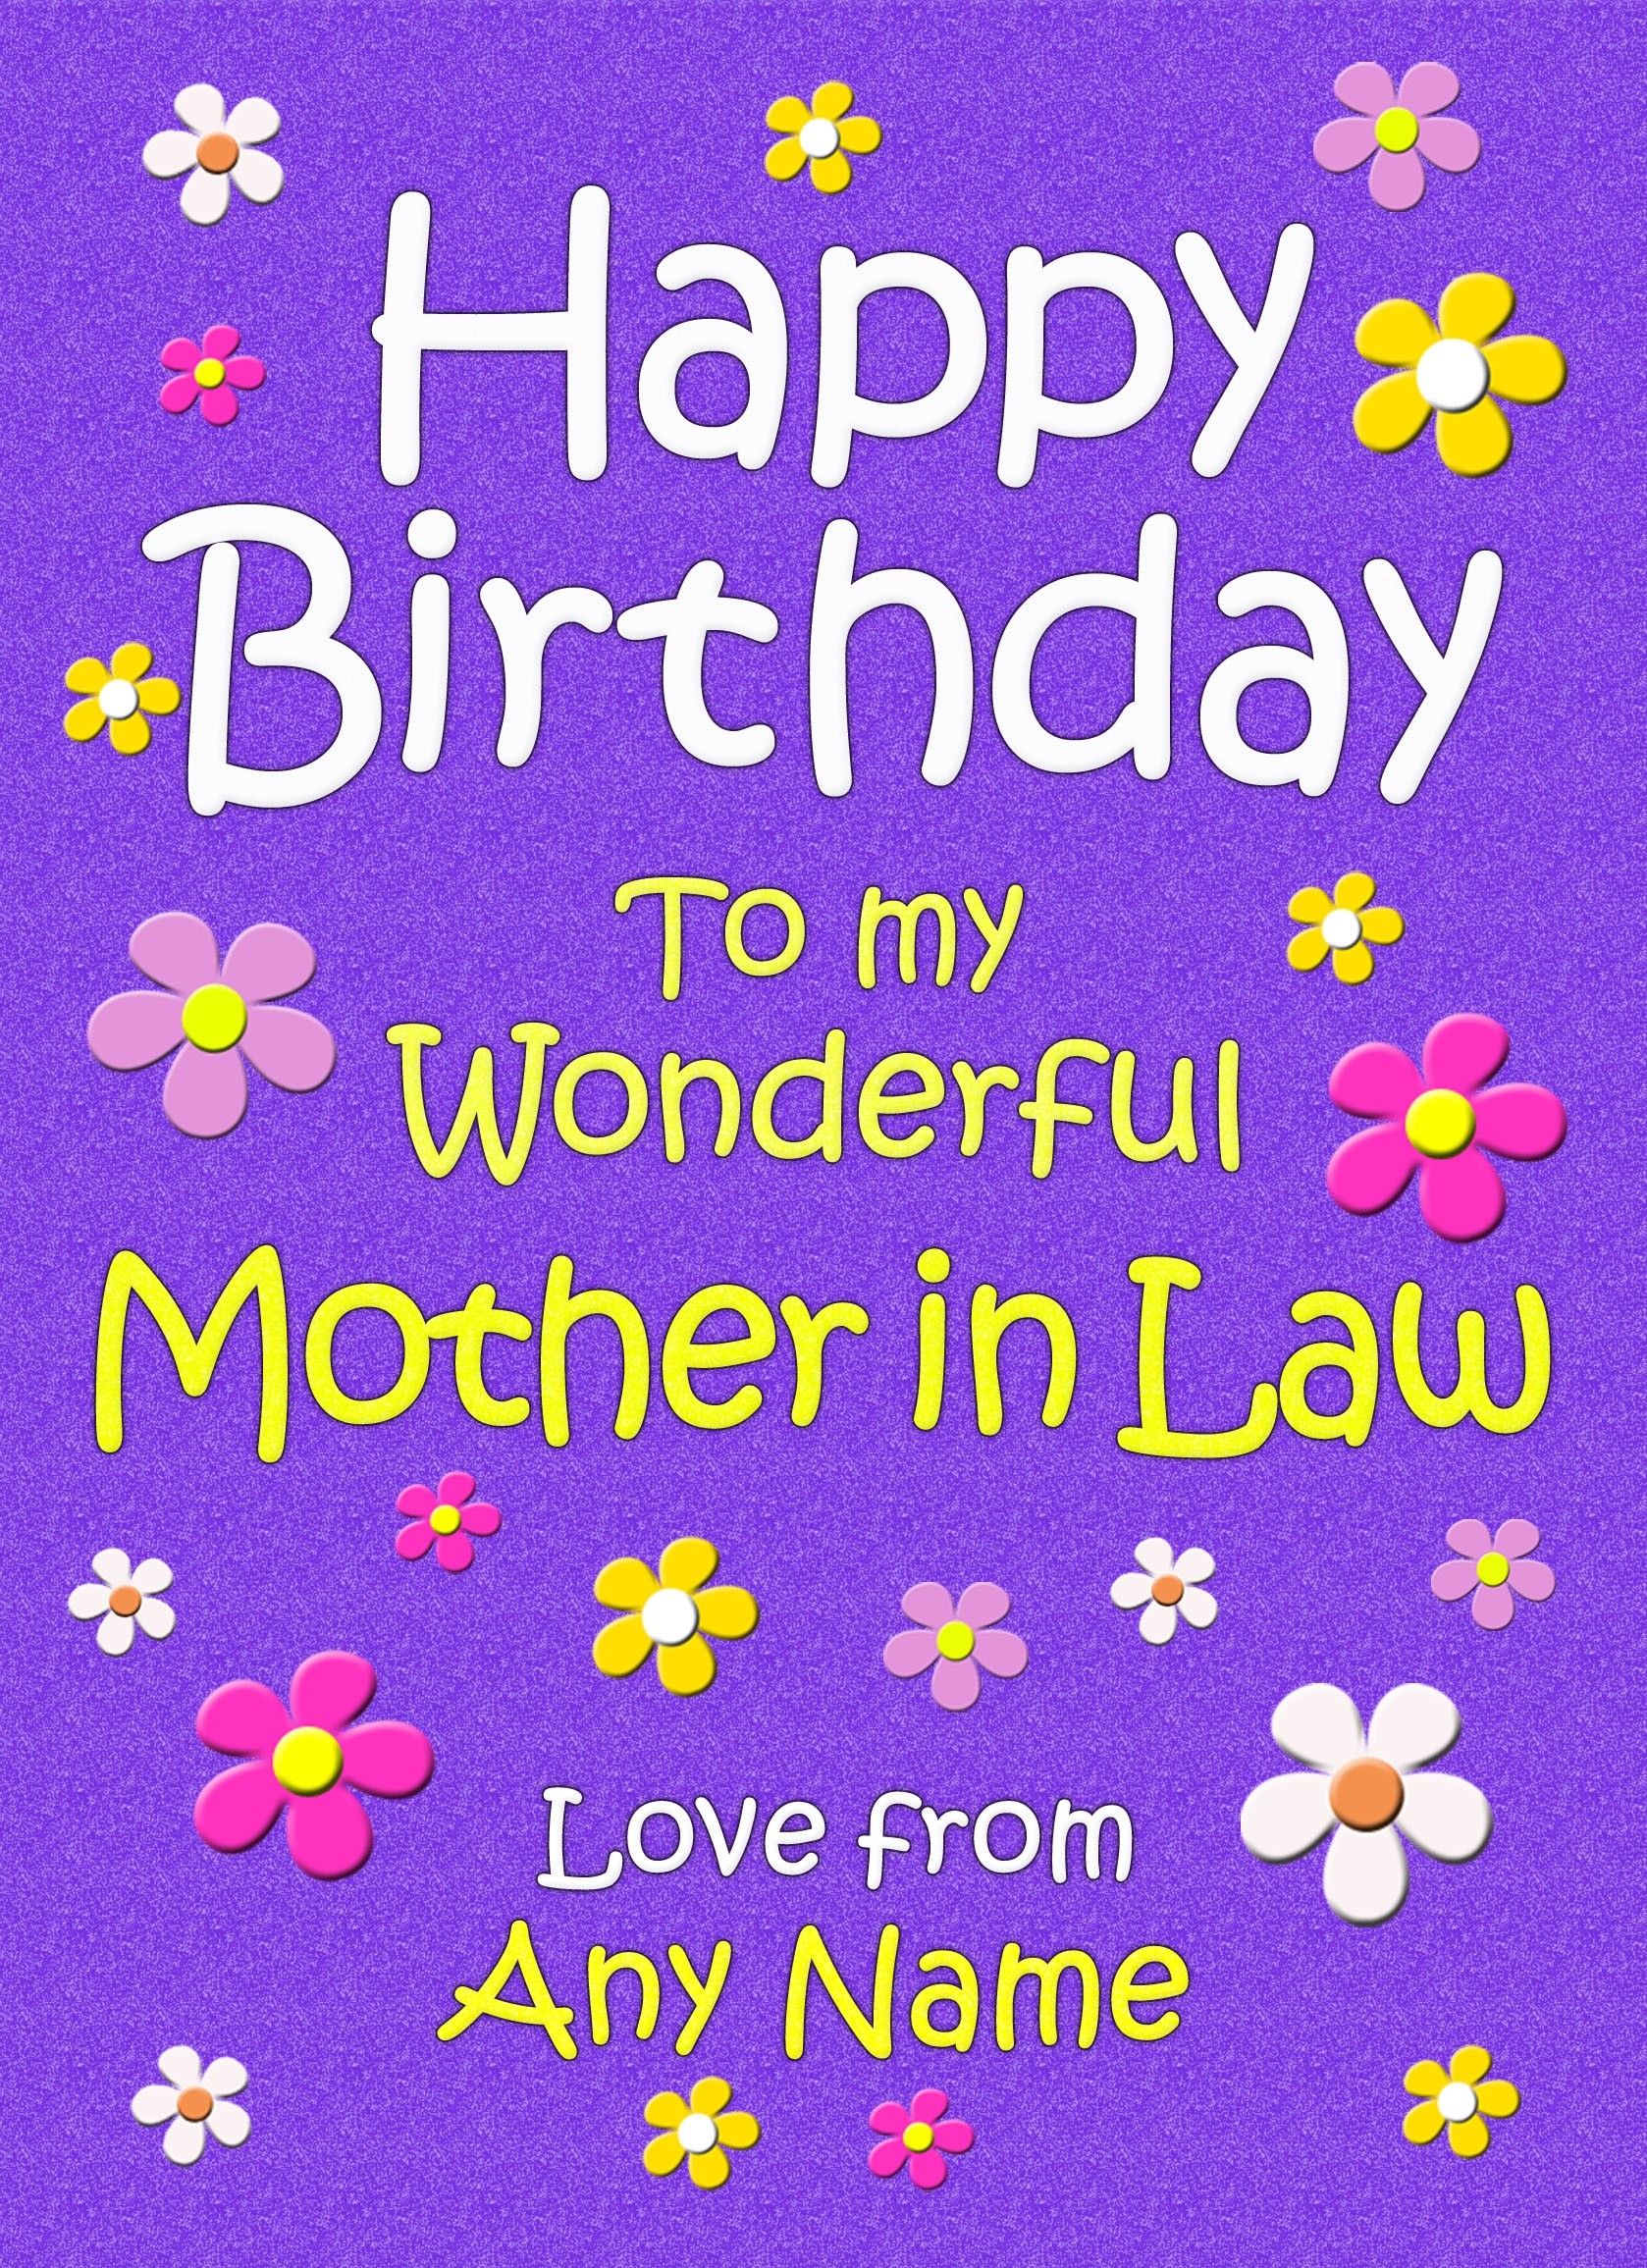 Personalised Mother in Law Birthday Card (Purple)